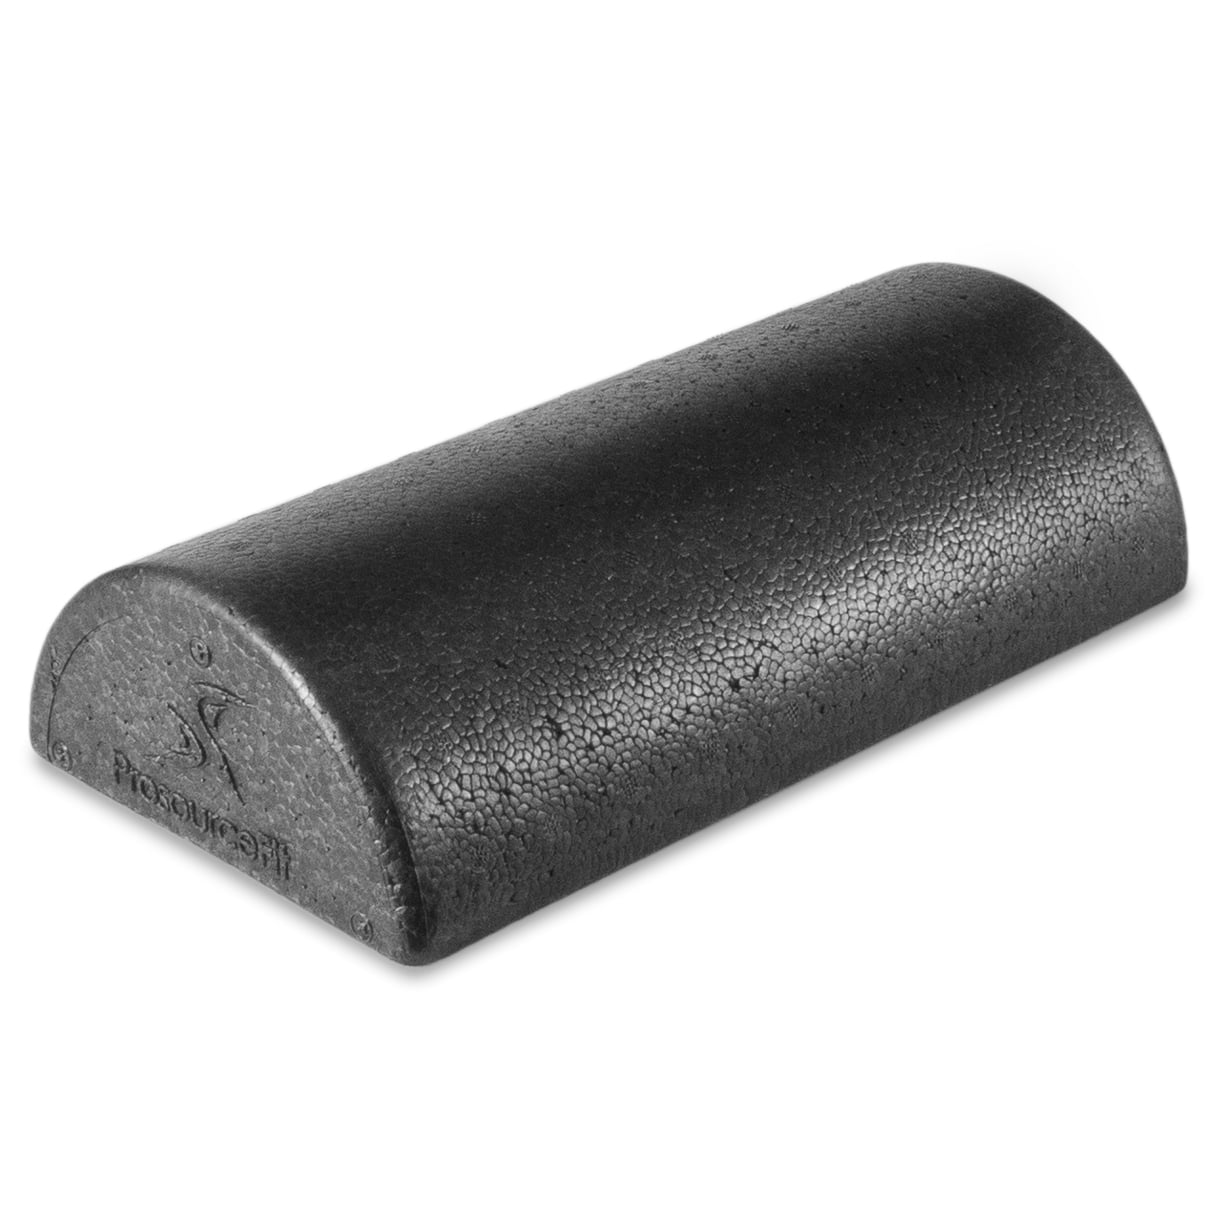 Foam Roller 6" x 12" Half Round High Density Extra Firm Black Fitness Exercise 